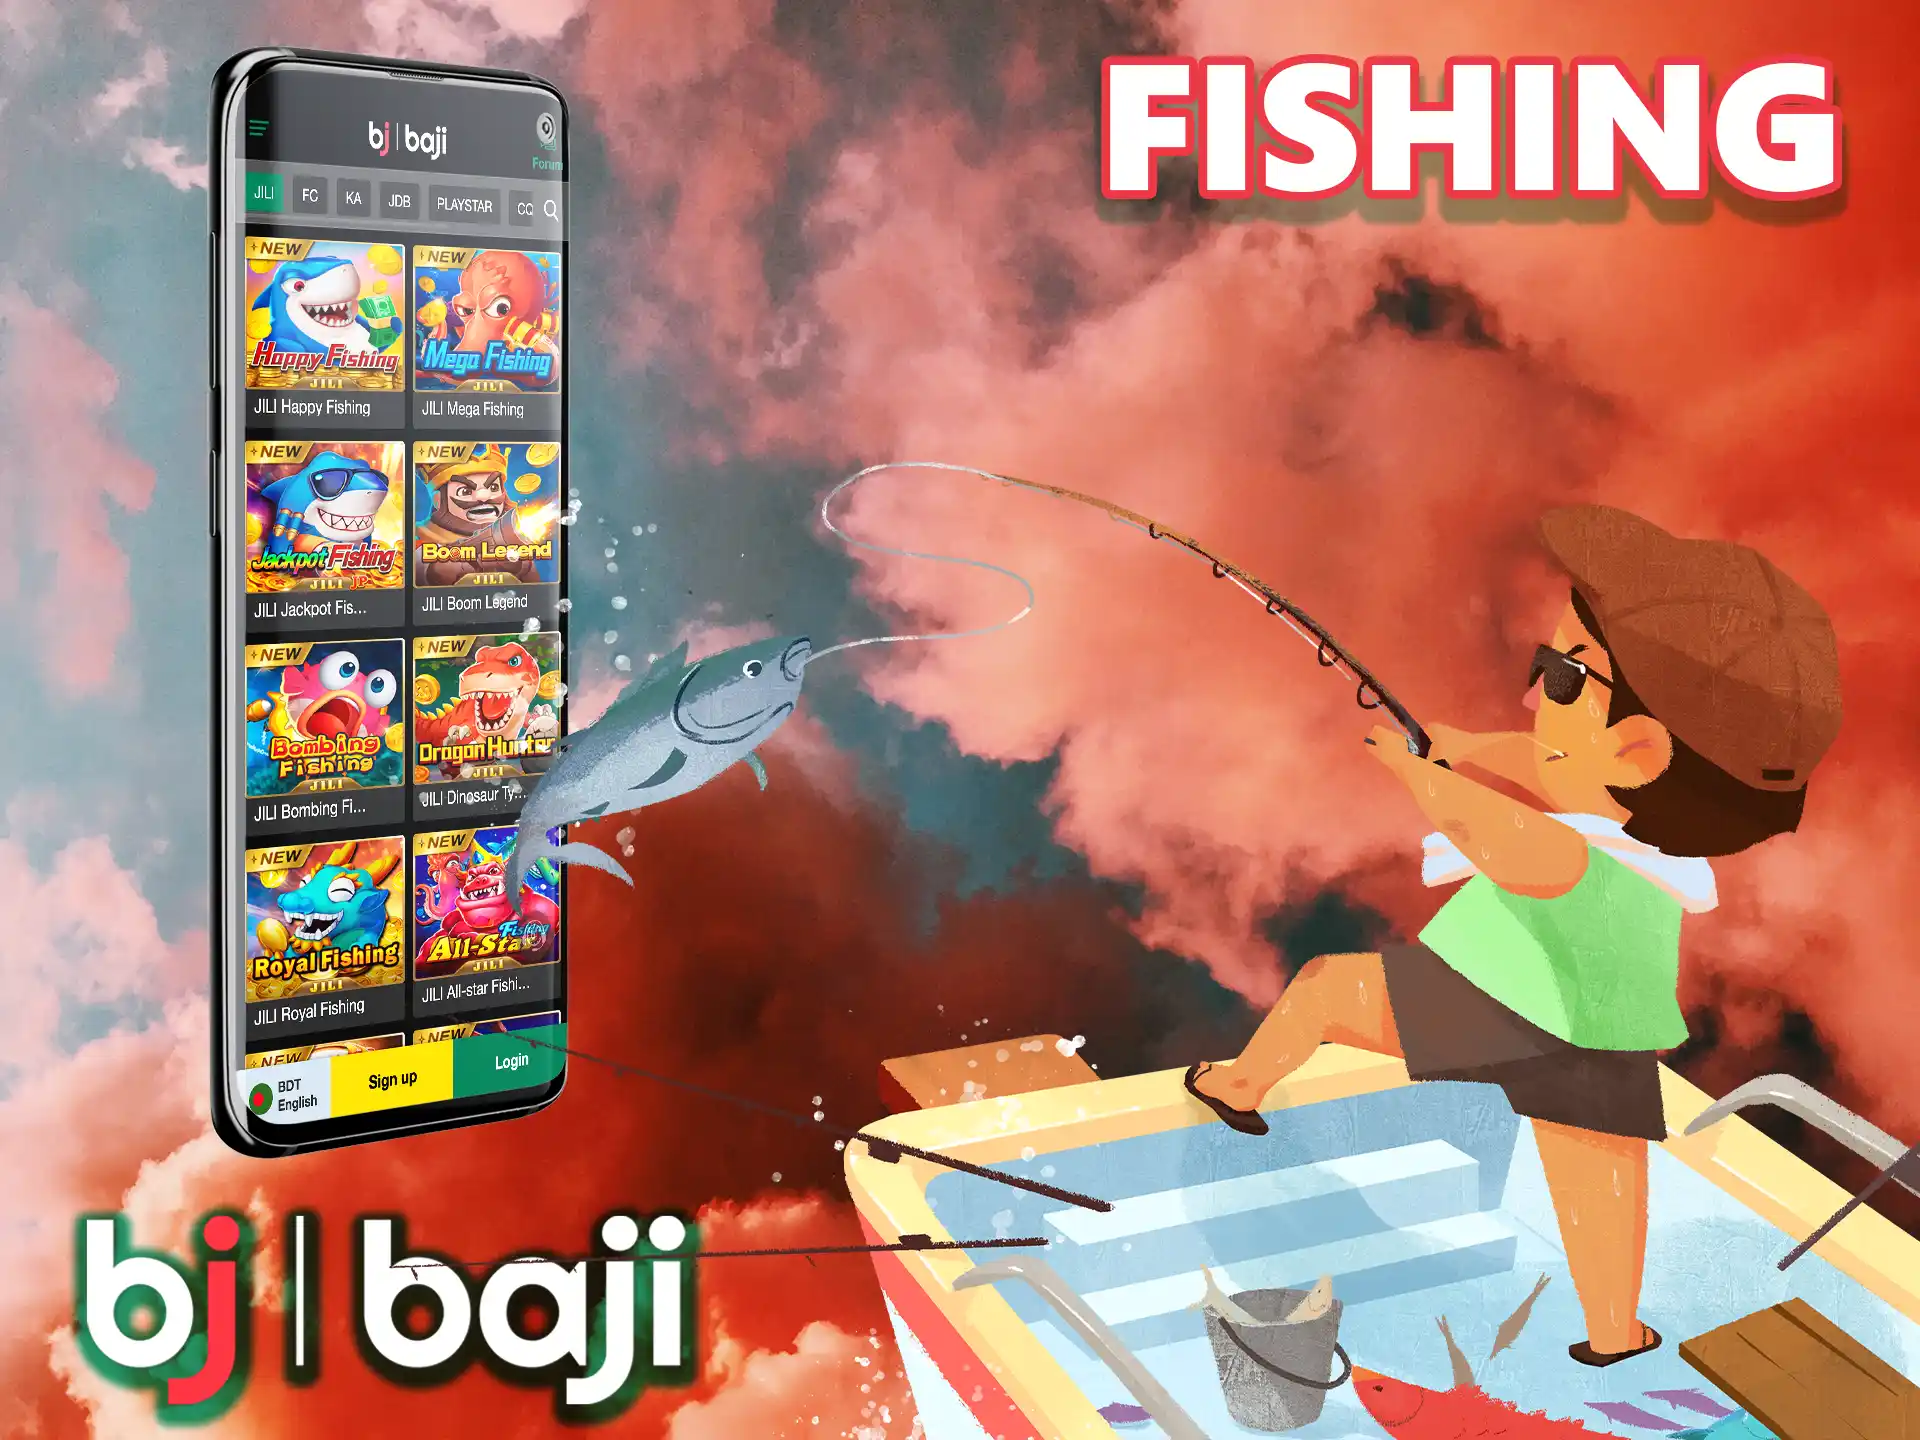 Fishermen will appreciate this section of games, catch different species of fish using the features of the Baji app.